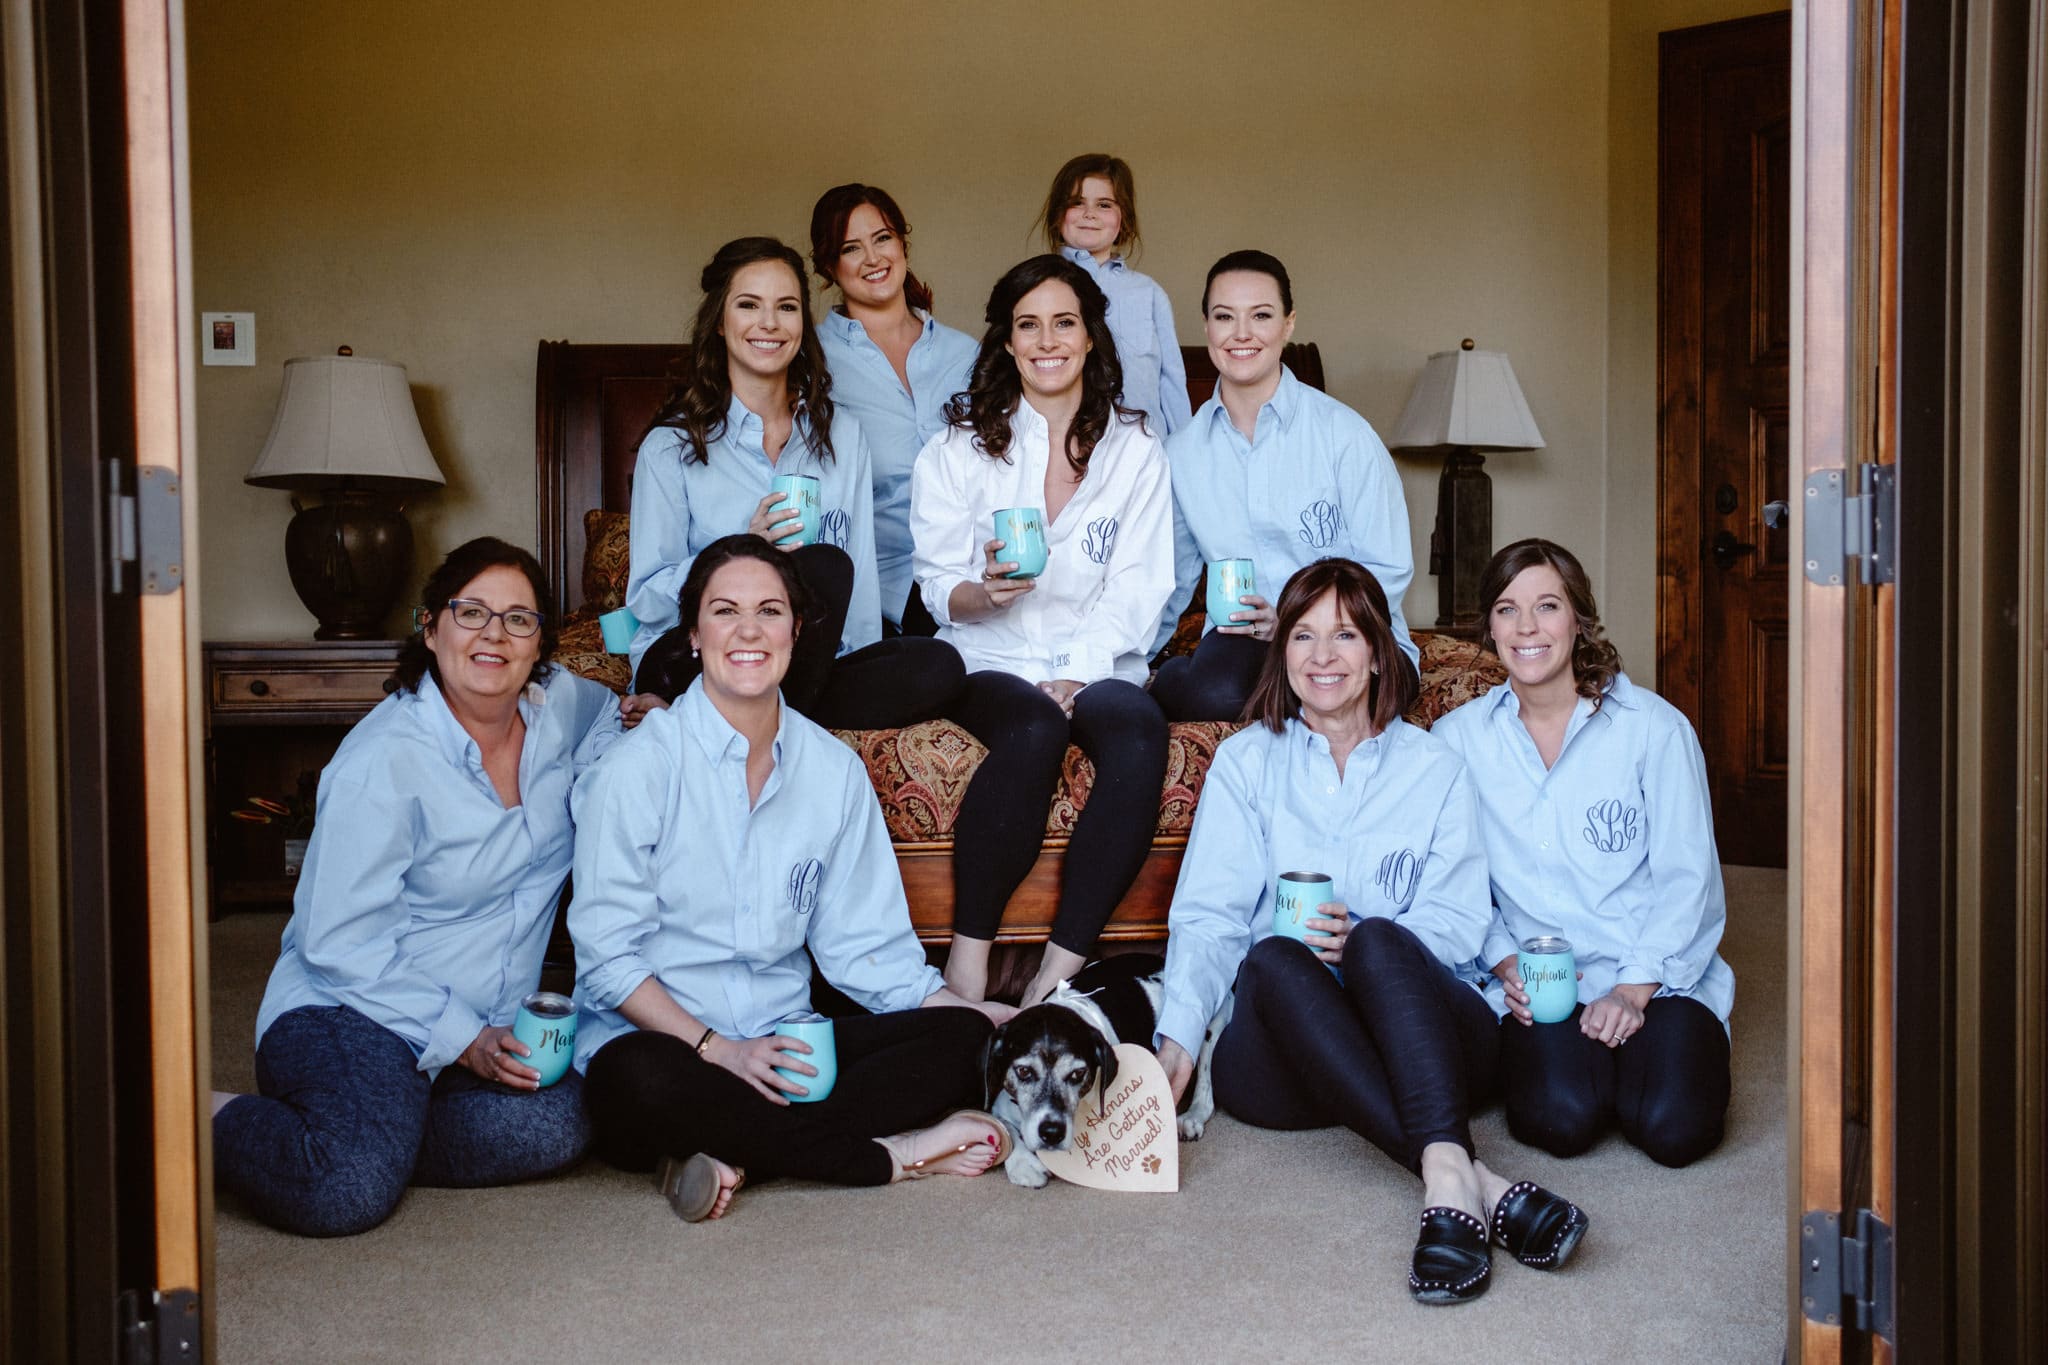 Bride and bridesmaids in matching monogrammed shirts while getting ready